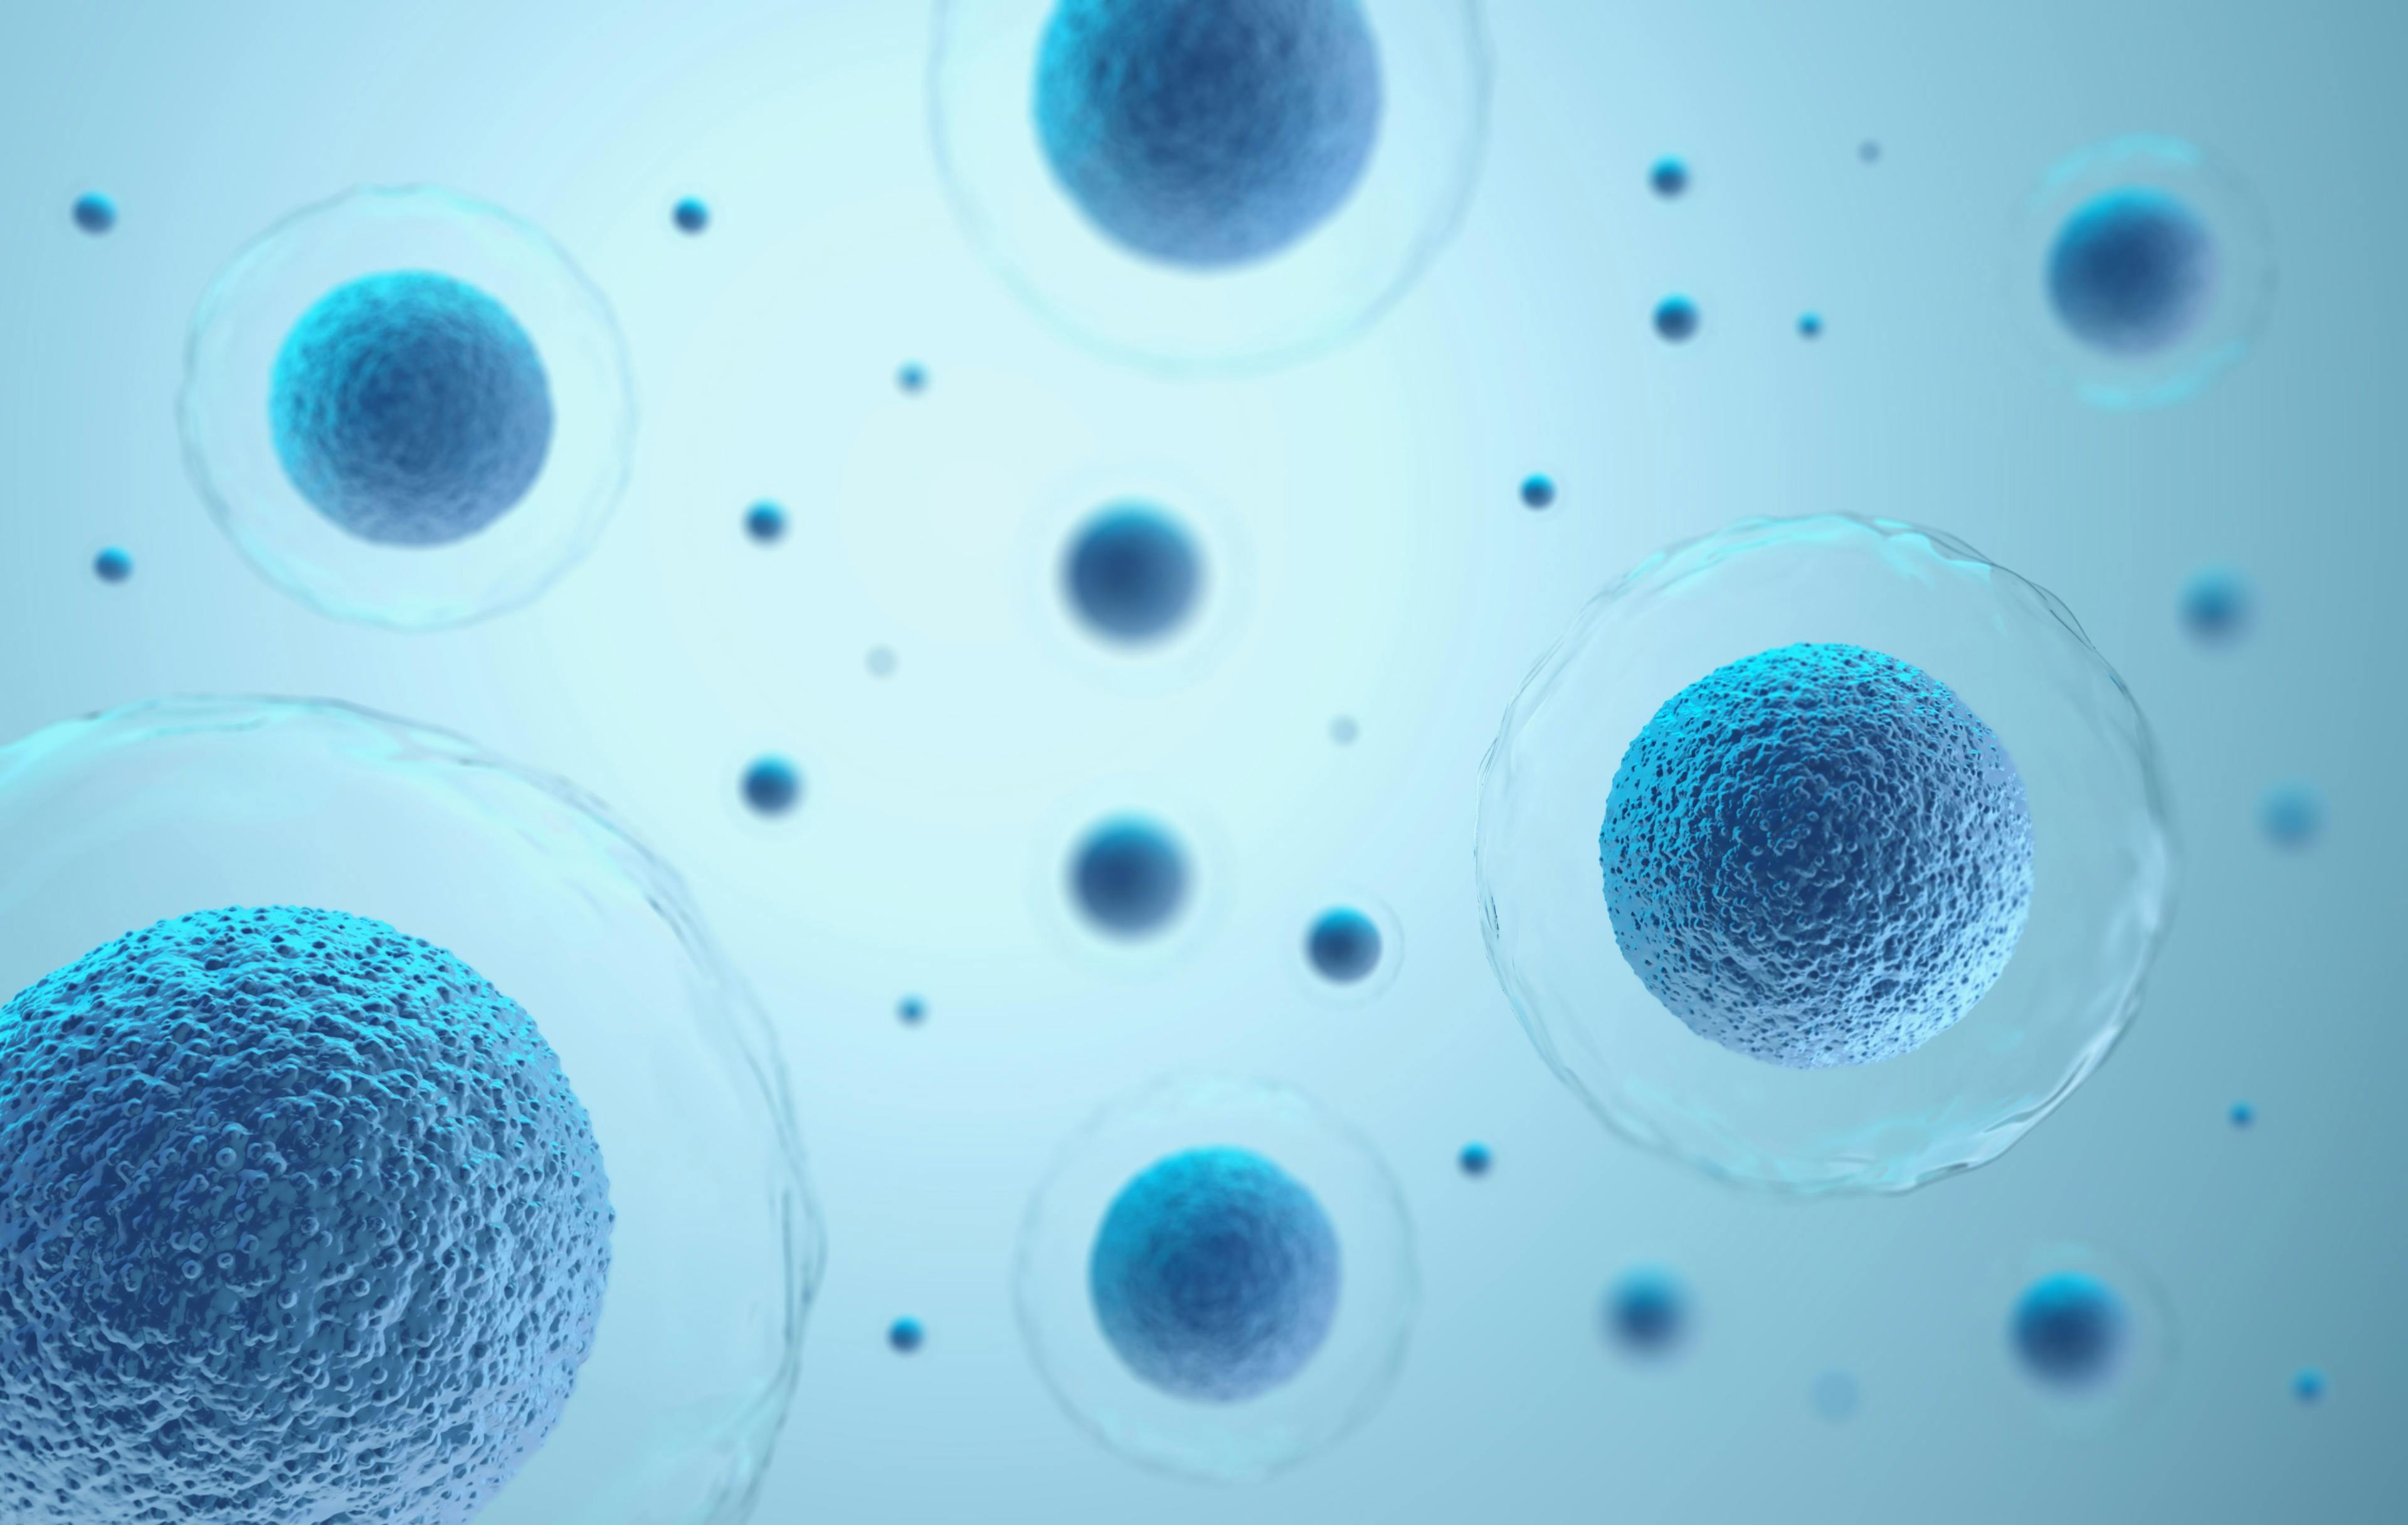 3d rendering of human cells in a blue background. | Image Credit: © Anusorn - stock.adobe.com